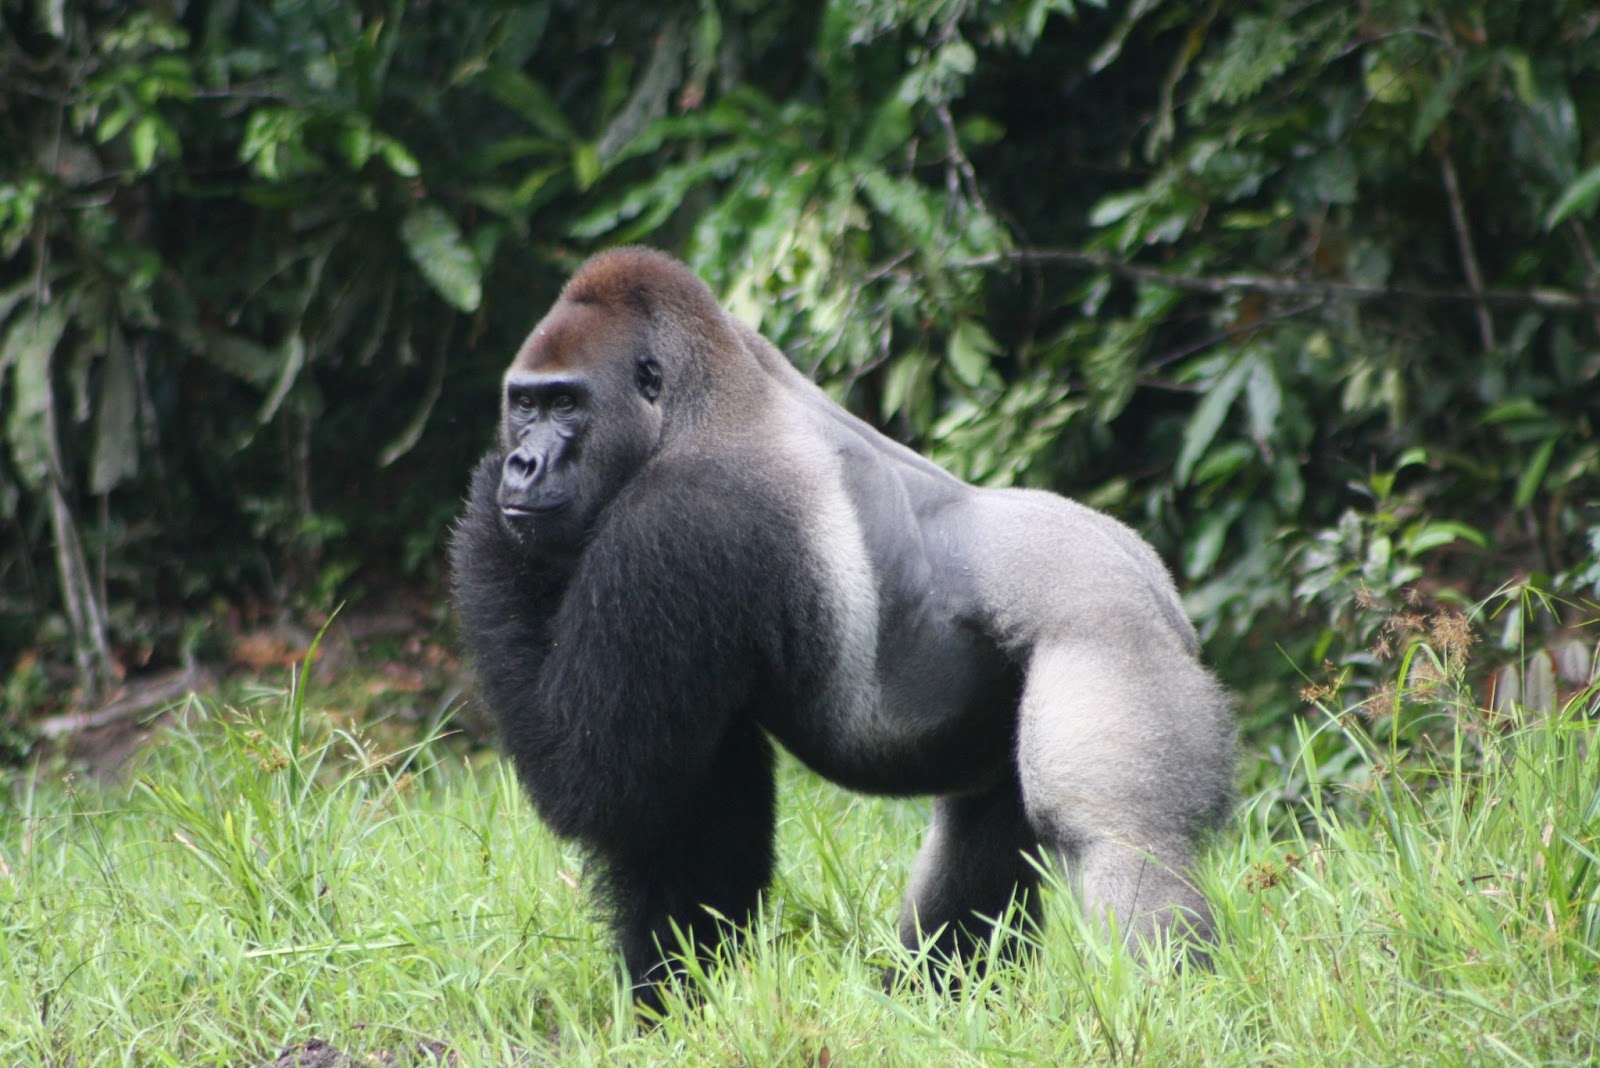 Gorillas Interesting Facts And Pictures | All Wildlife Photographs